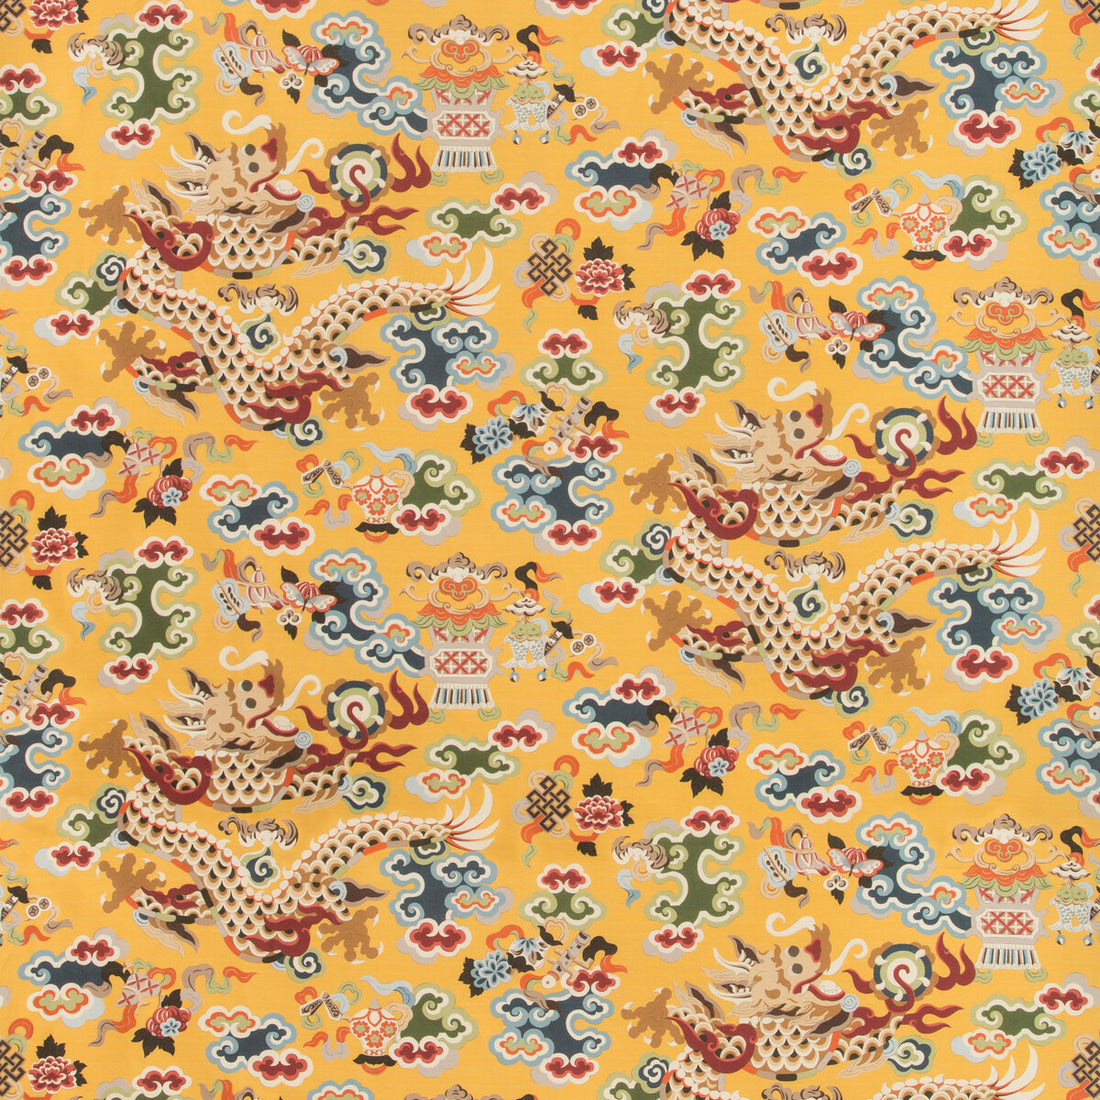 Ming Dragon Print fabric in saffron color - pattern 8019140.495.0 - by Brunschwig &amp; Fils in the Summer Palace collection